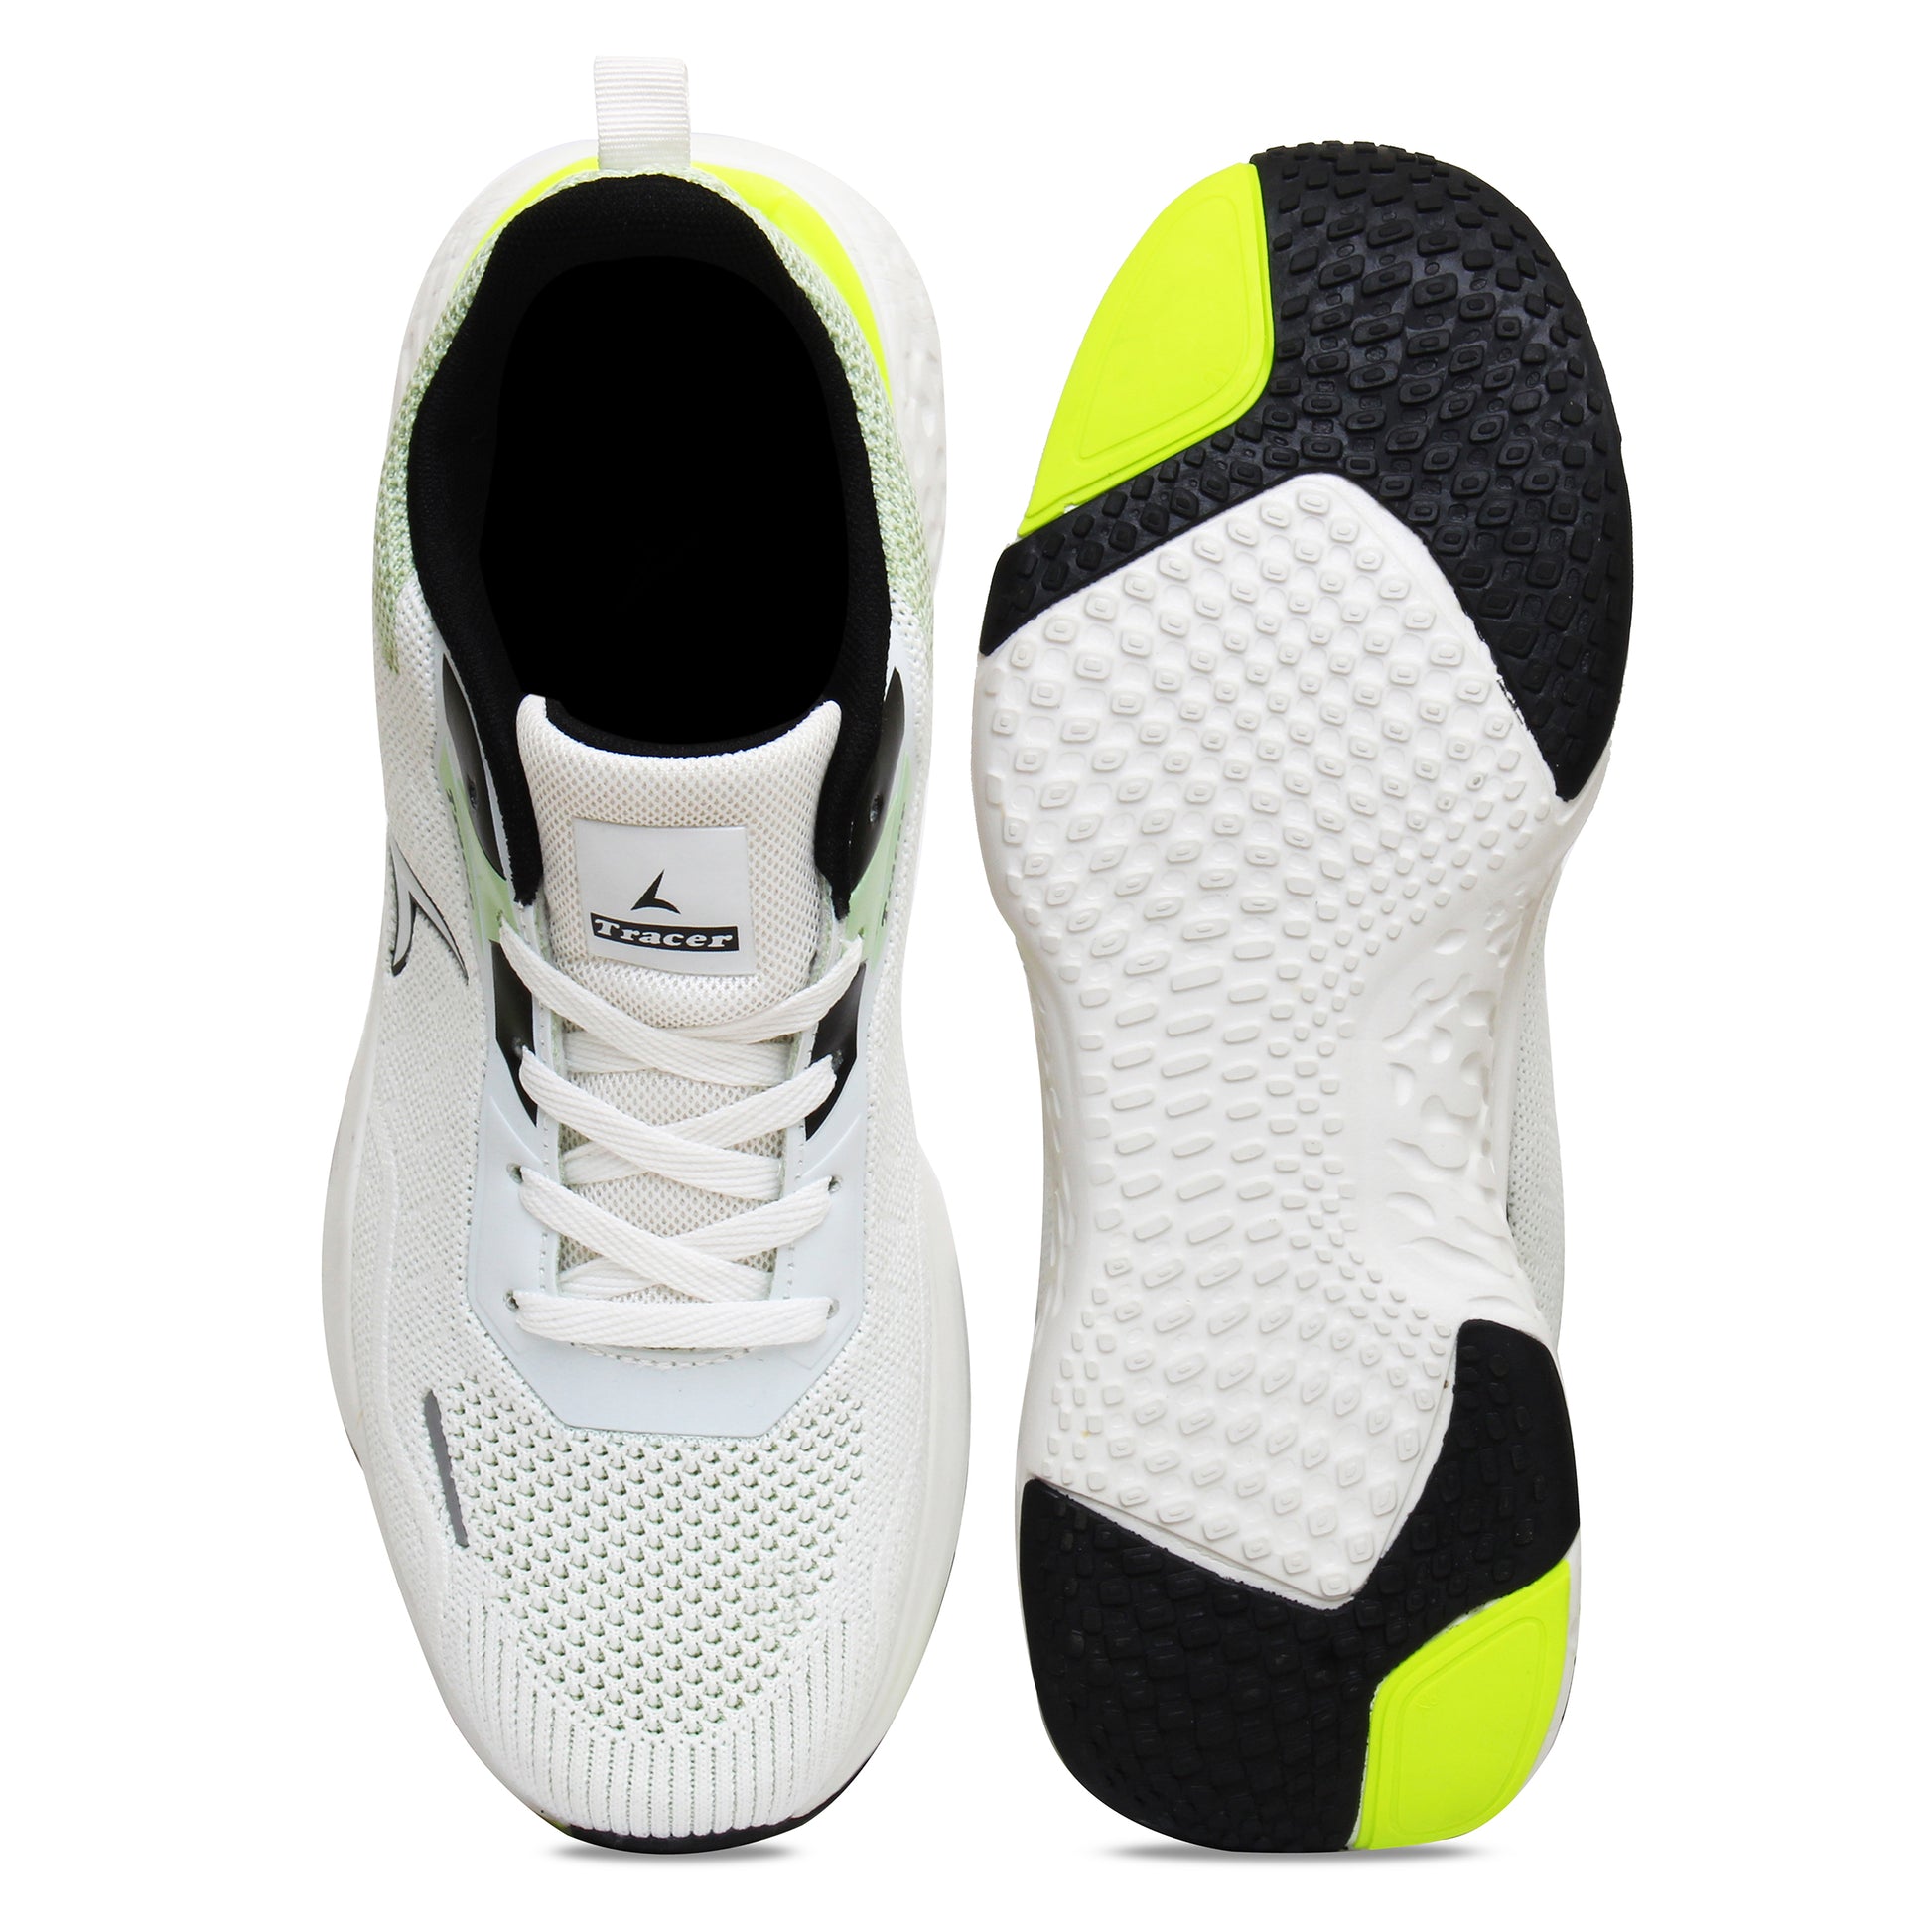 Casual Shoes For Men White